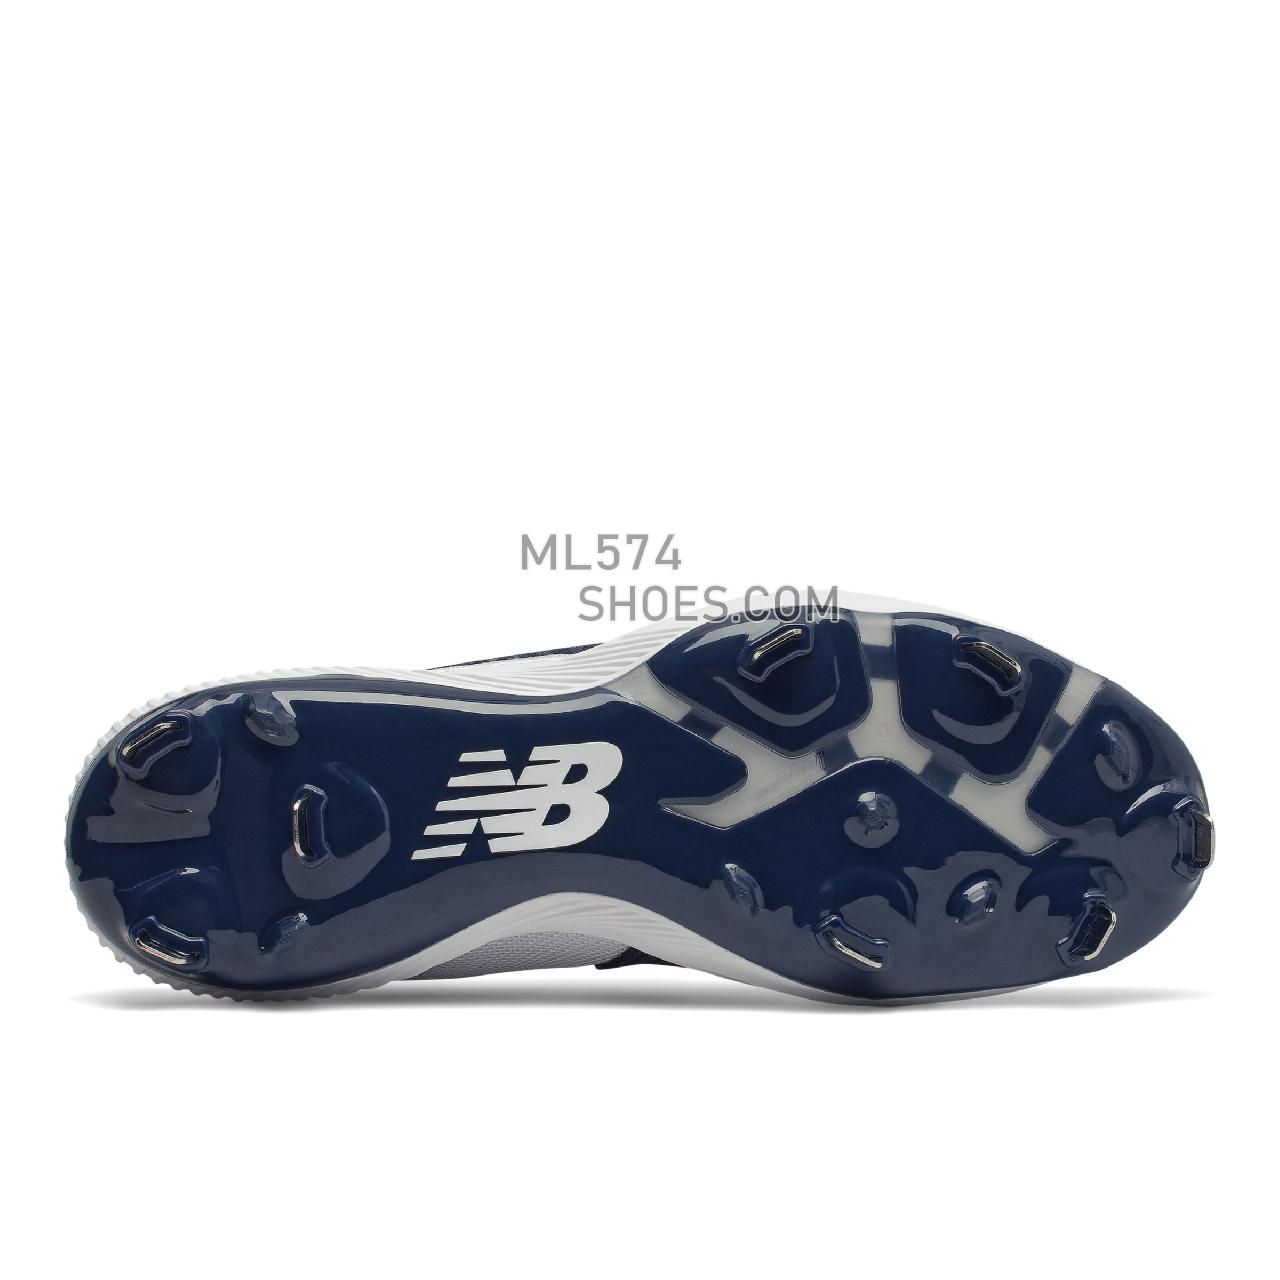 New Balance FuelCell 4040 v6 Metal - Men's Mid-Cut Baseball Cleats - Team Navy with White - L4040TN6